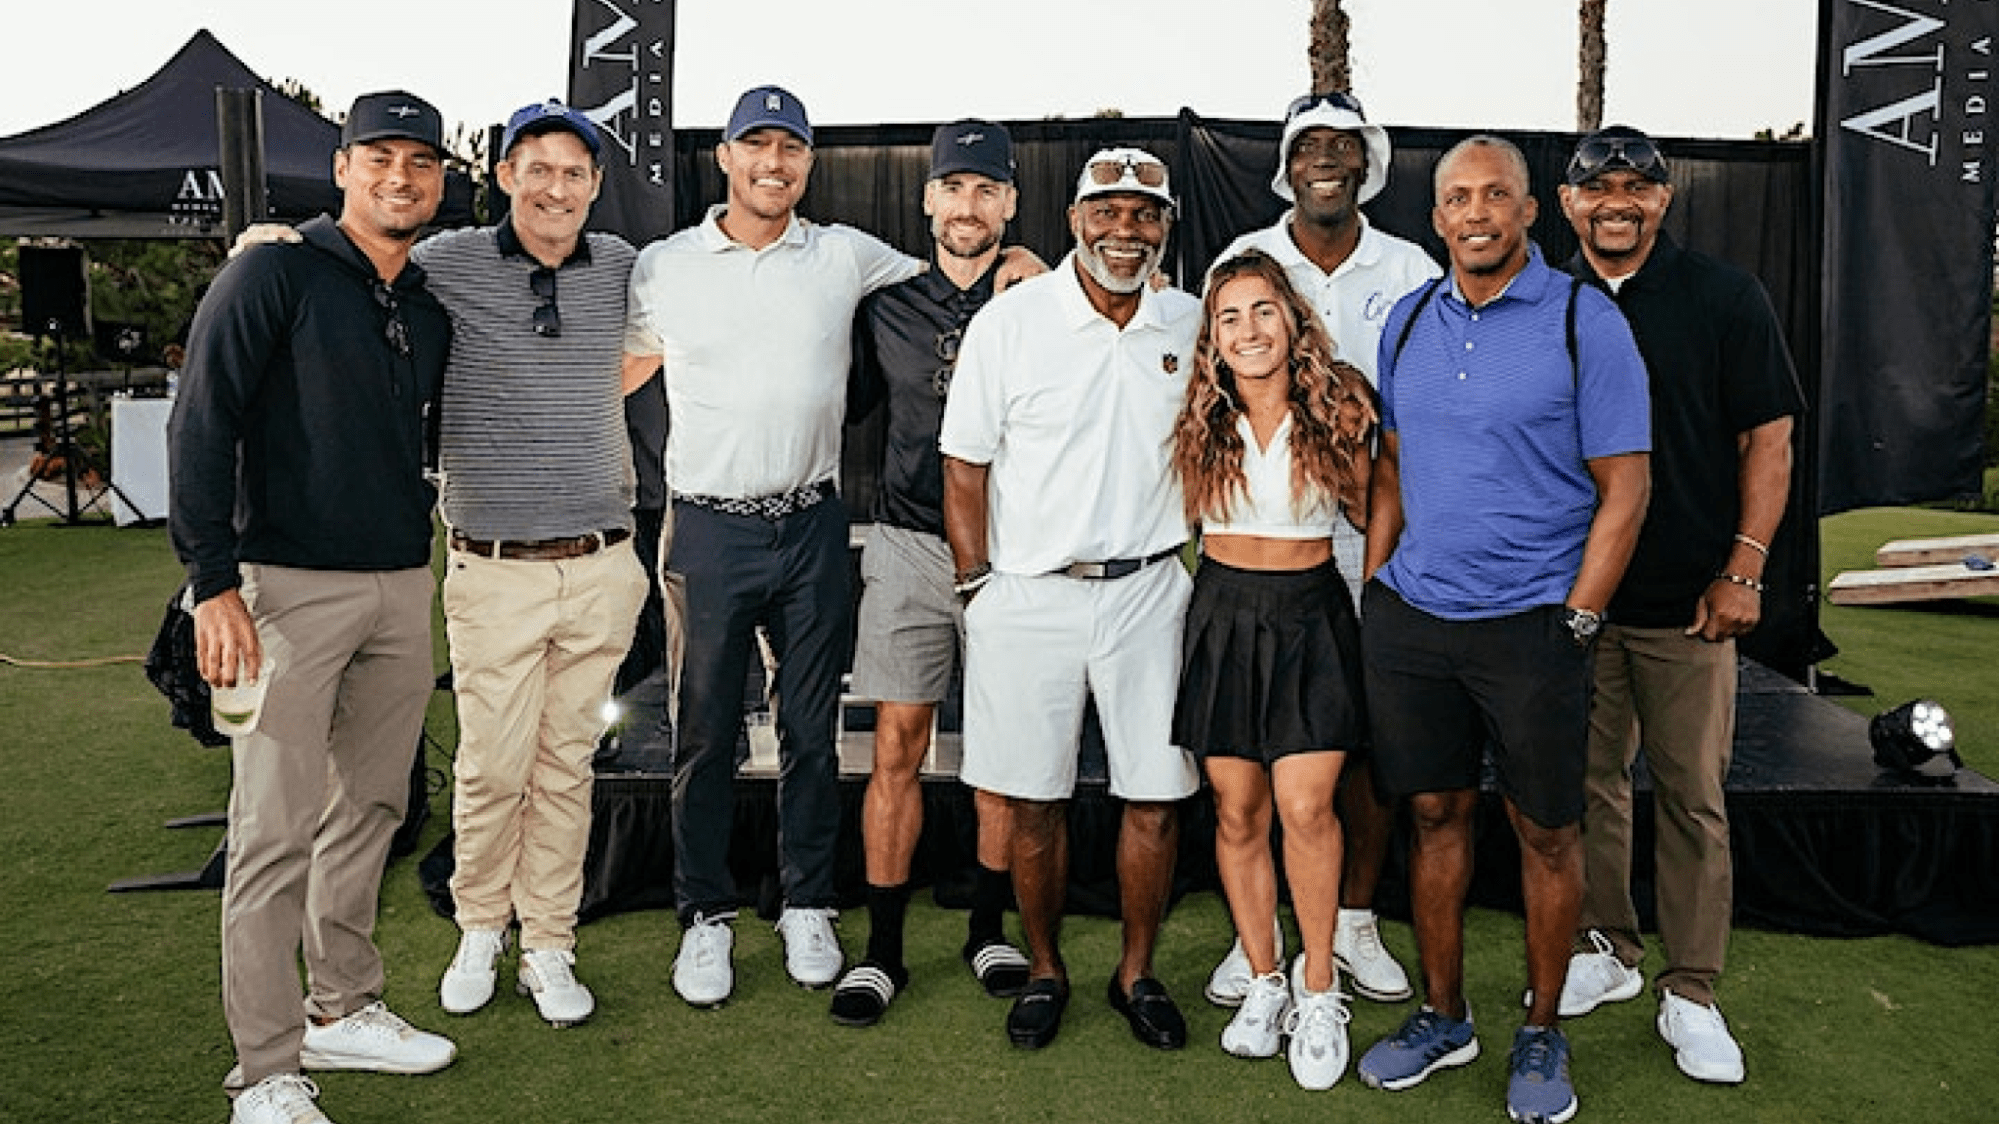 Golf tournament players pose for a photo